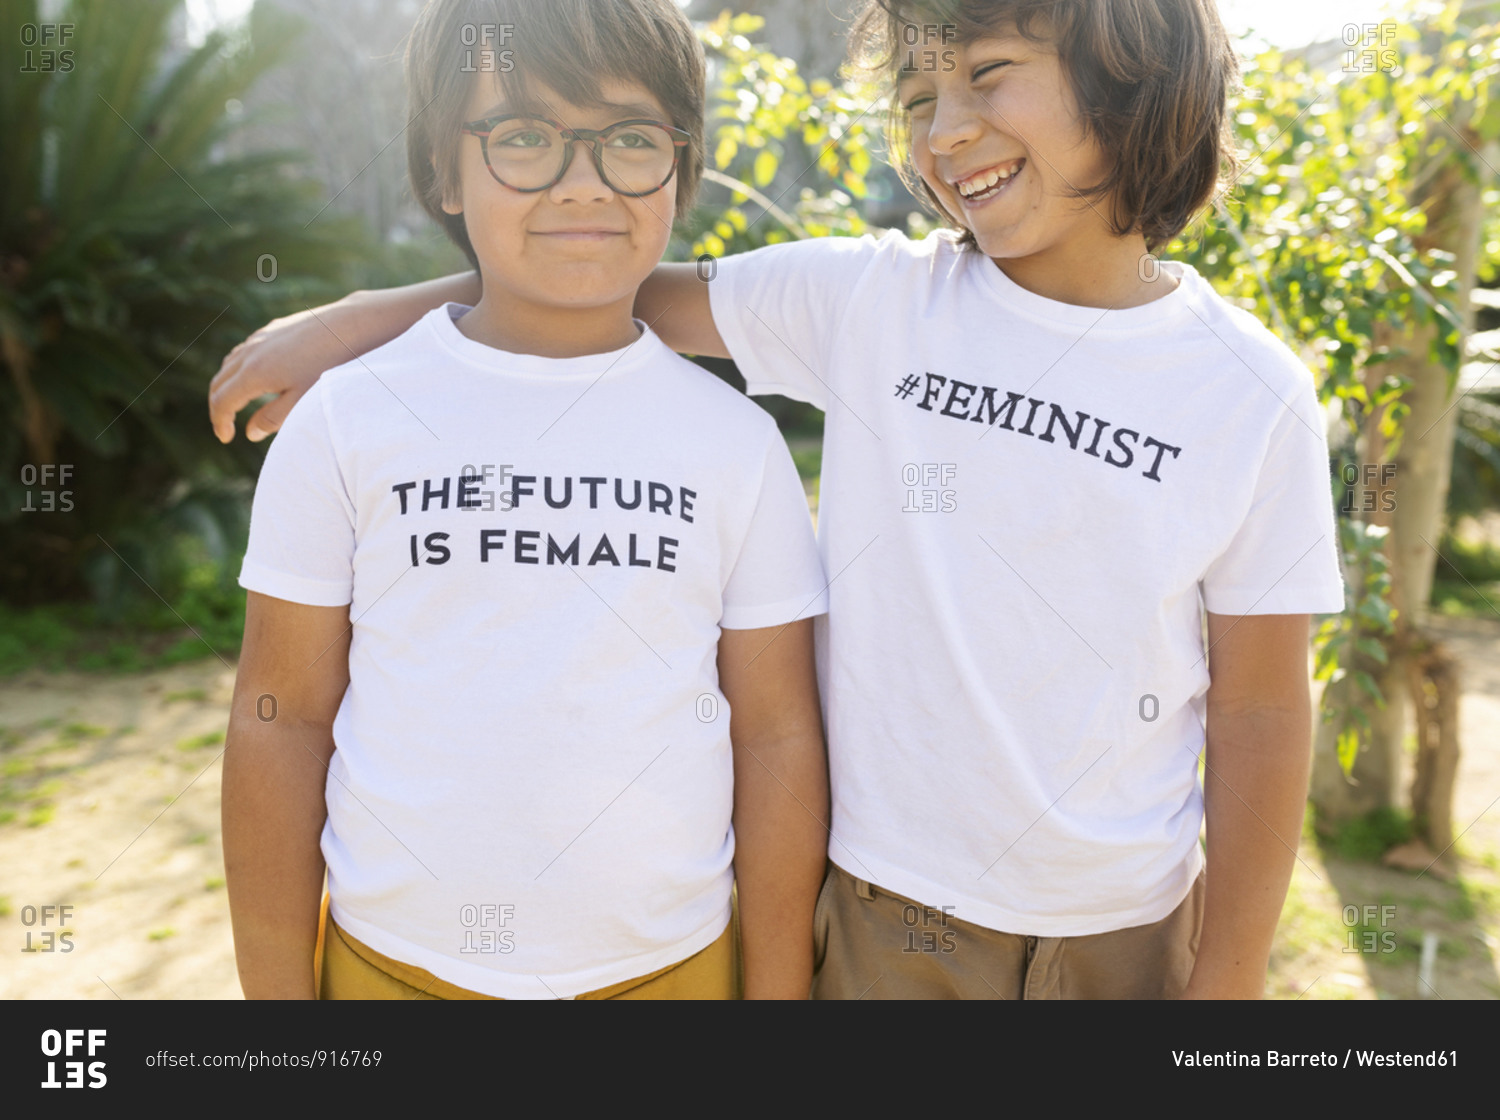 Two boys standing in the street with print on t-shirt- saying feminist and the future is female